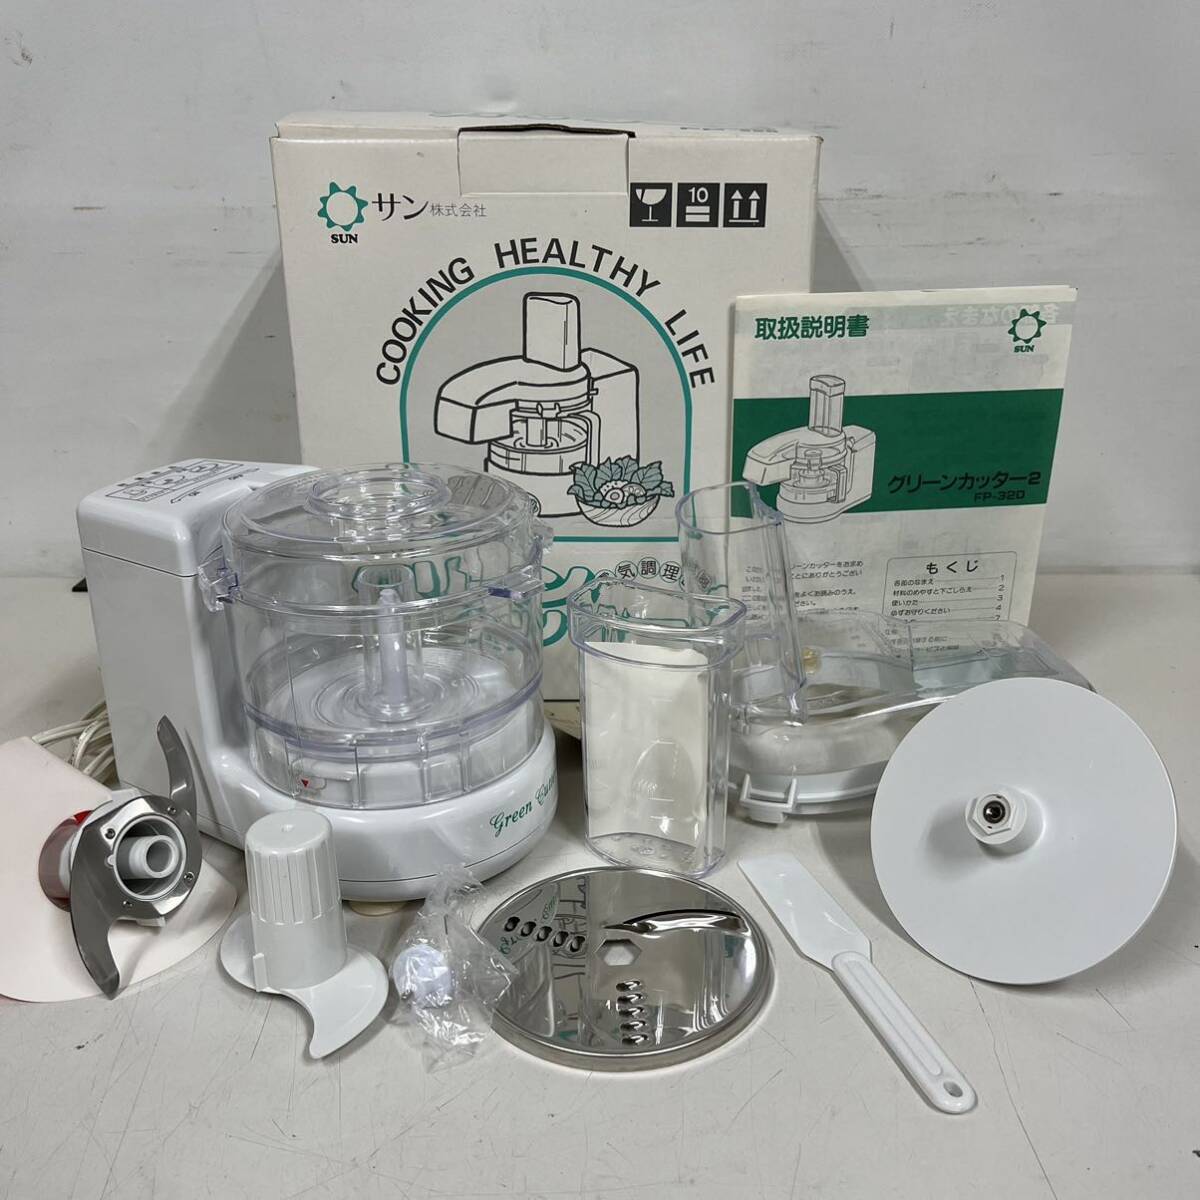 0 unused goods green cutter 2 FP-320 food processor sun corporation cooking under .... box instructions attaching 